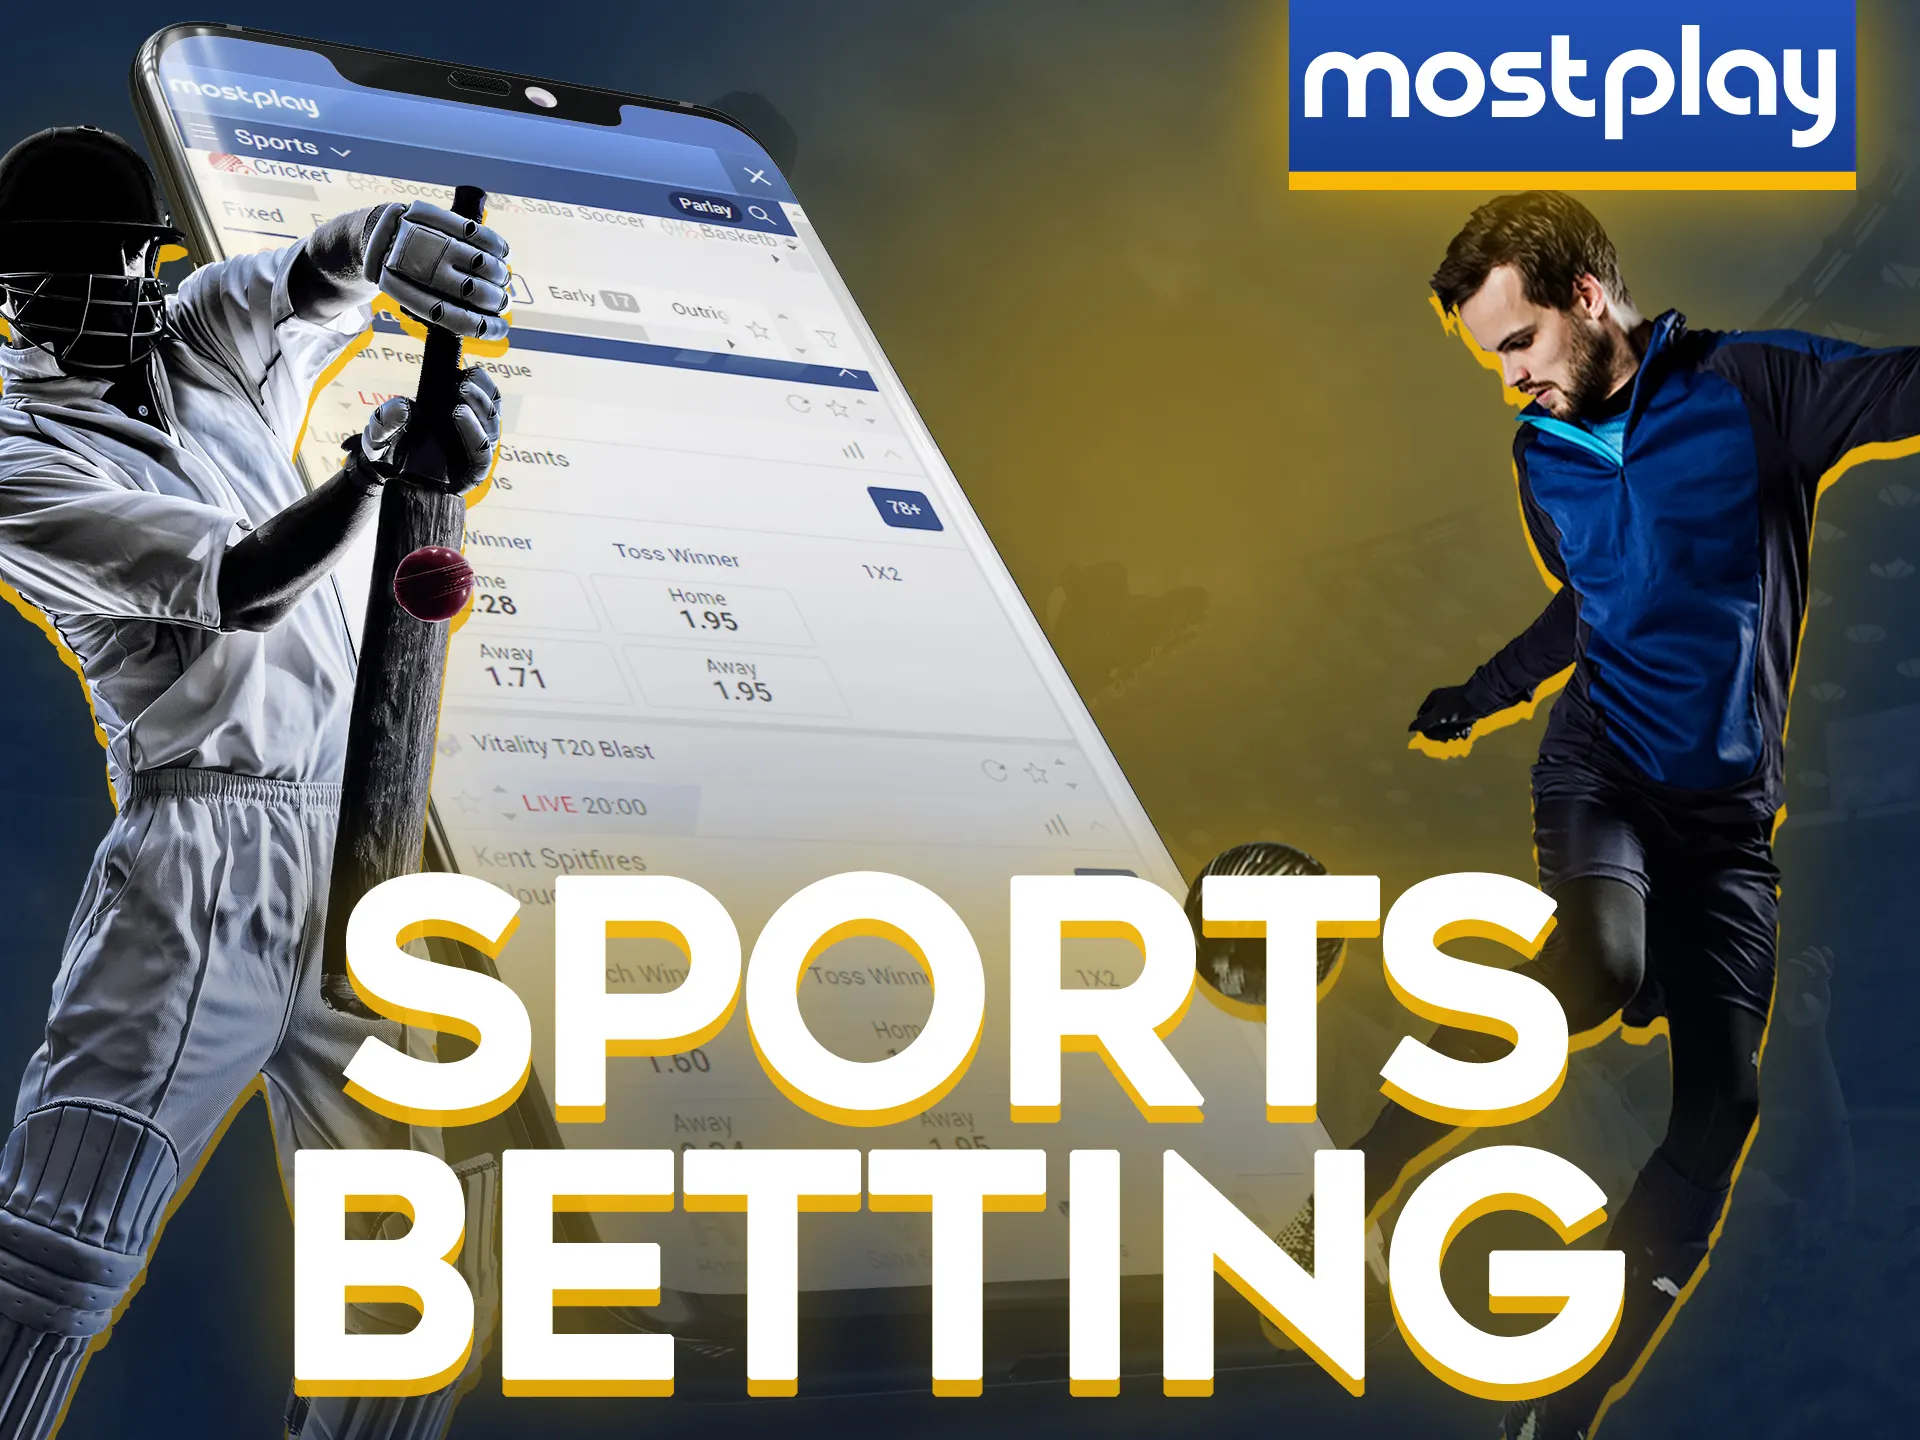 Bet on your favorite sports in the Mostplay app.